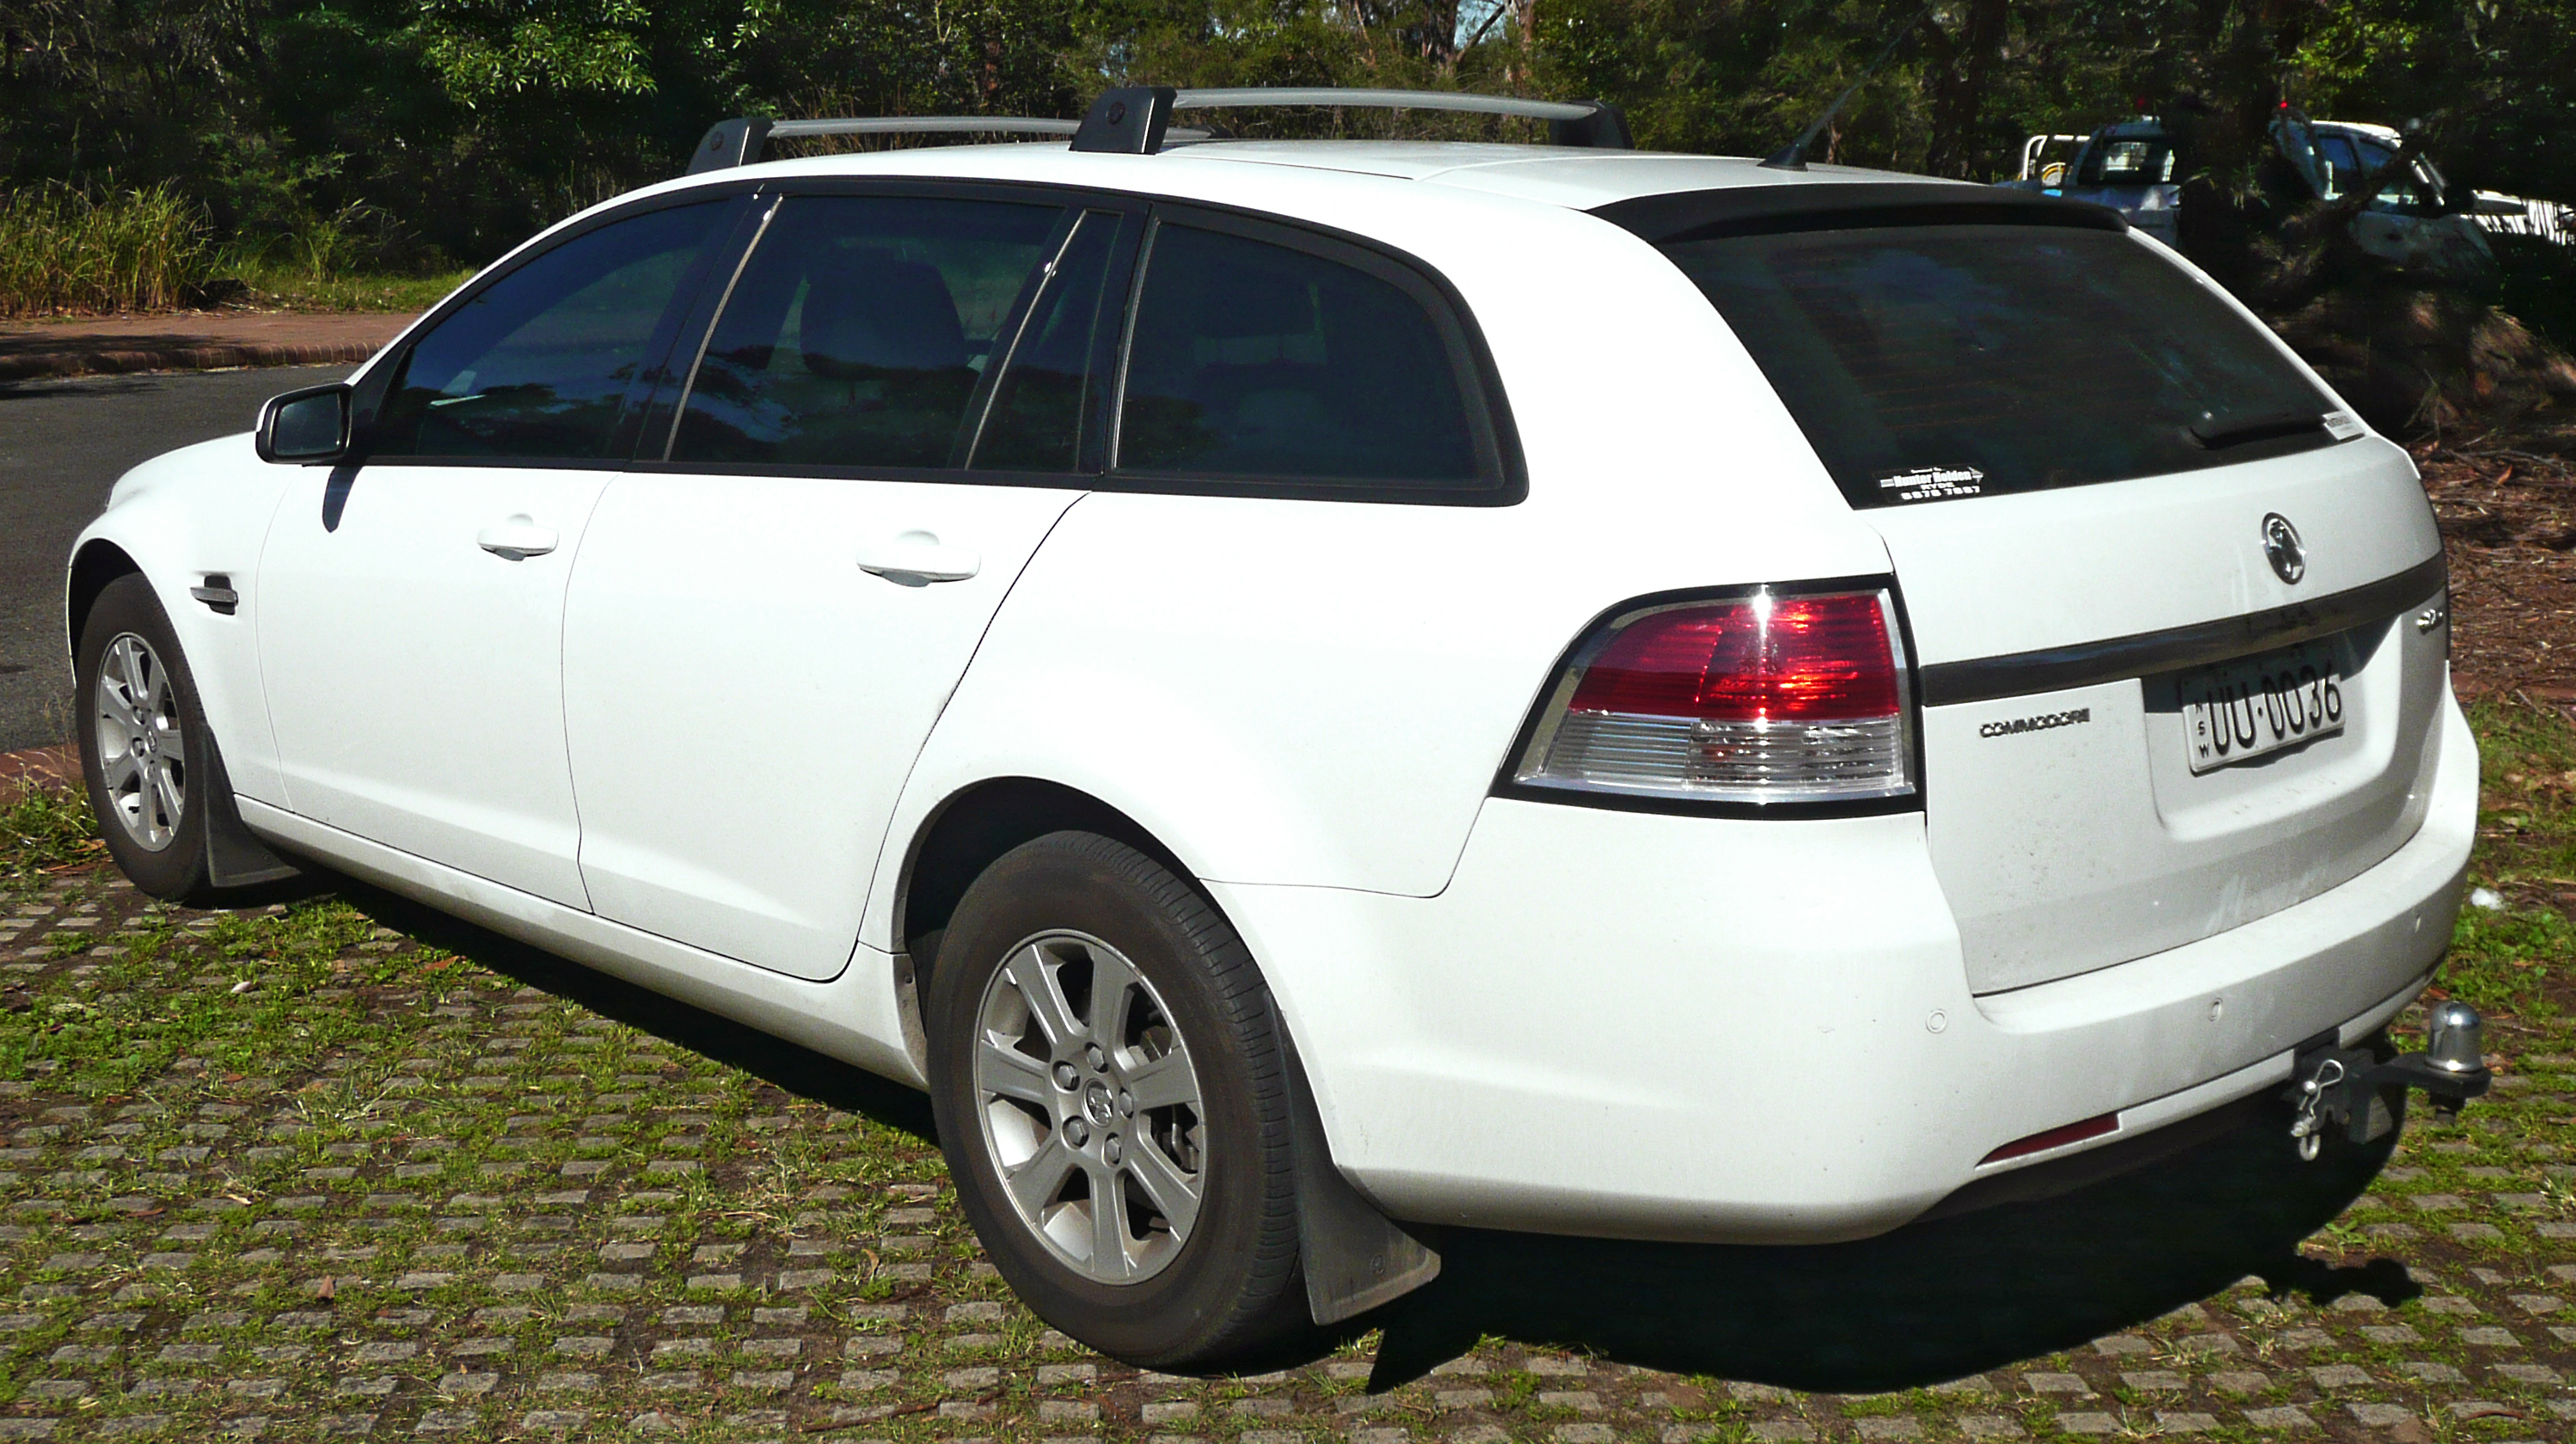 Holden commodore sportwagon (758 comments) Views 20219 Rating 95